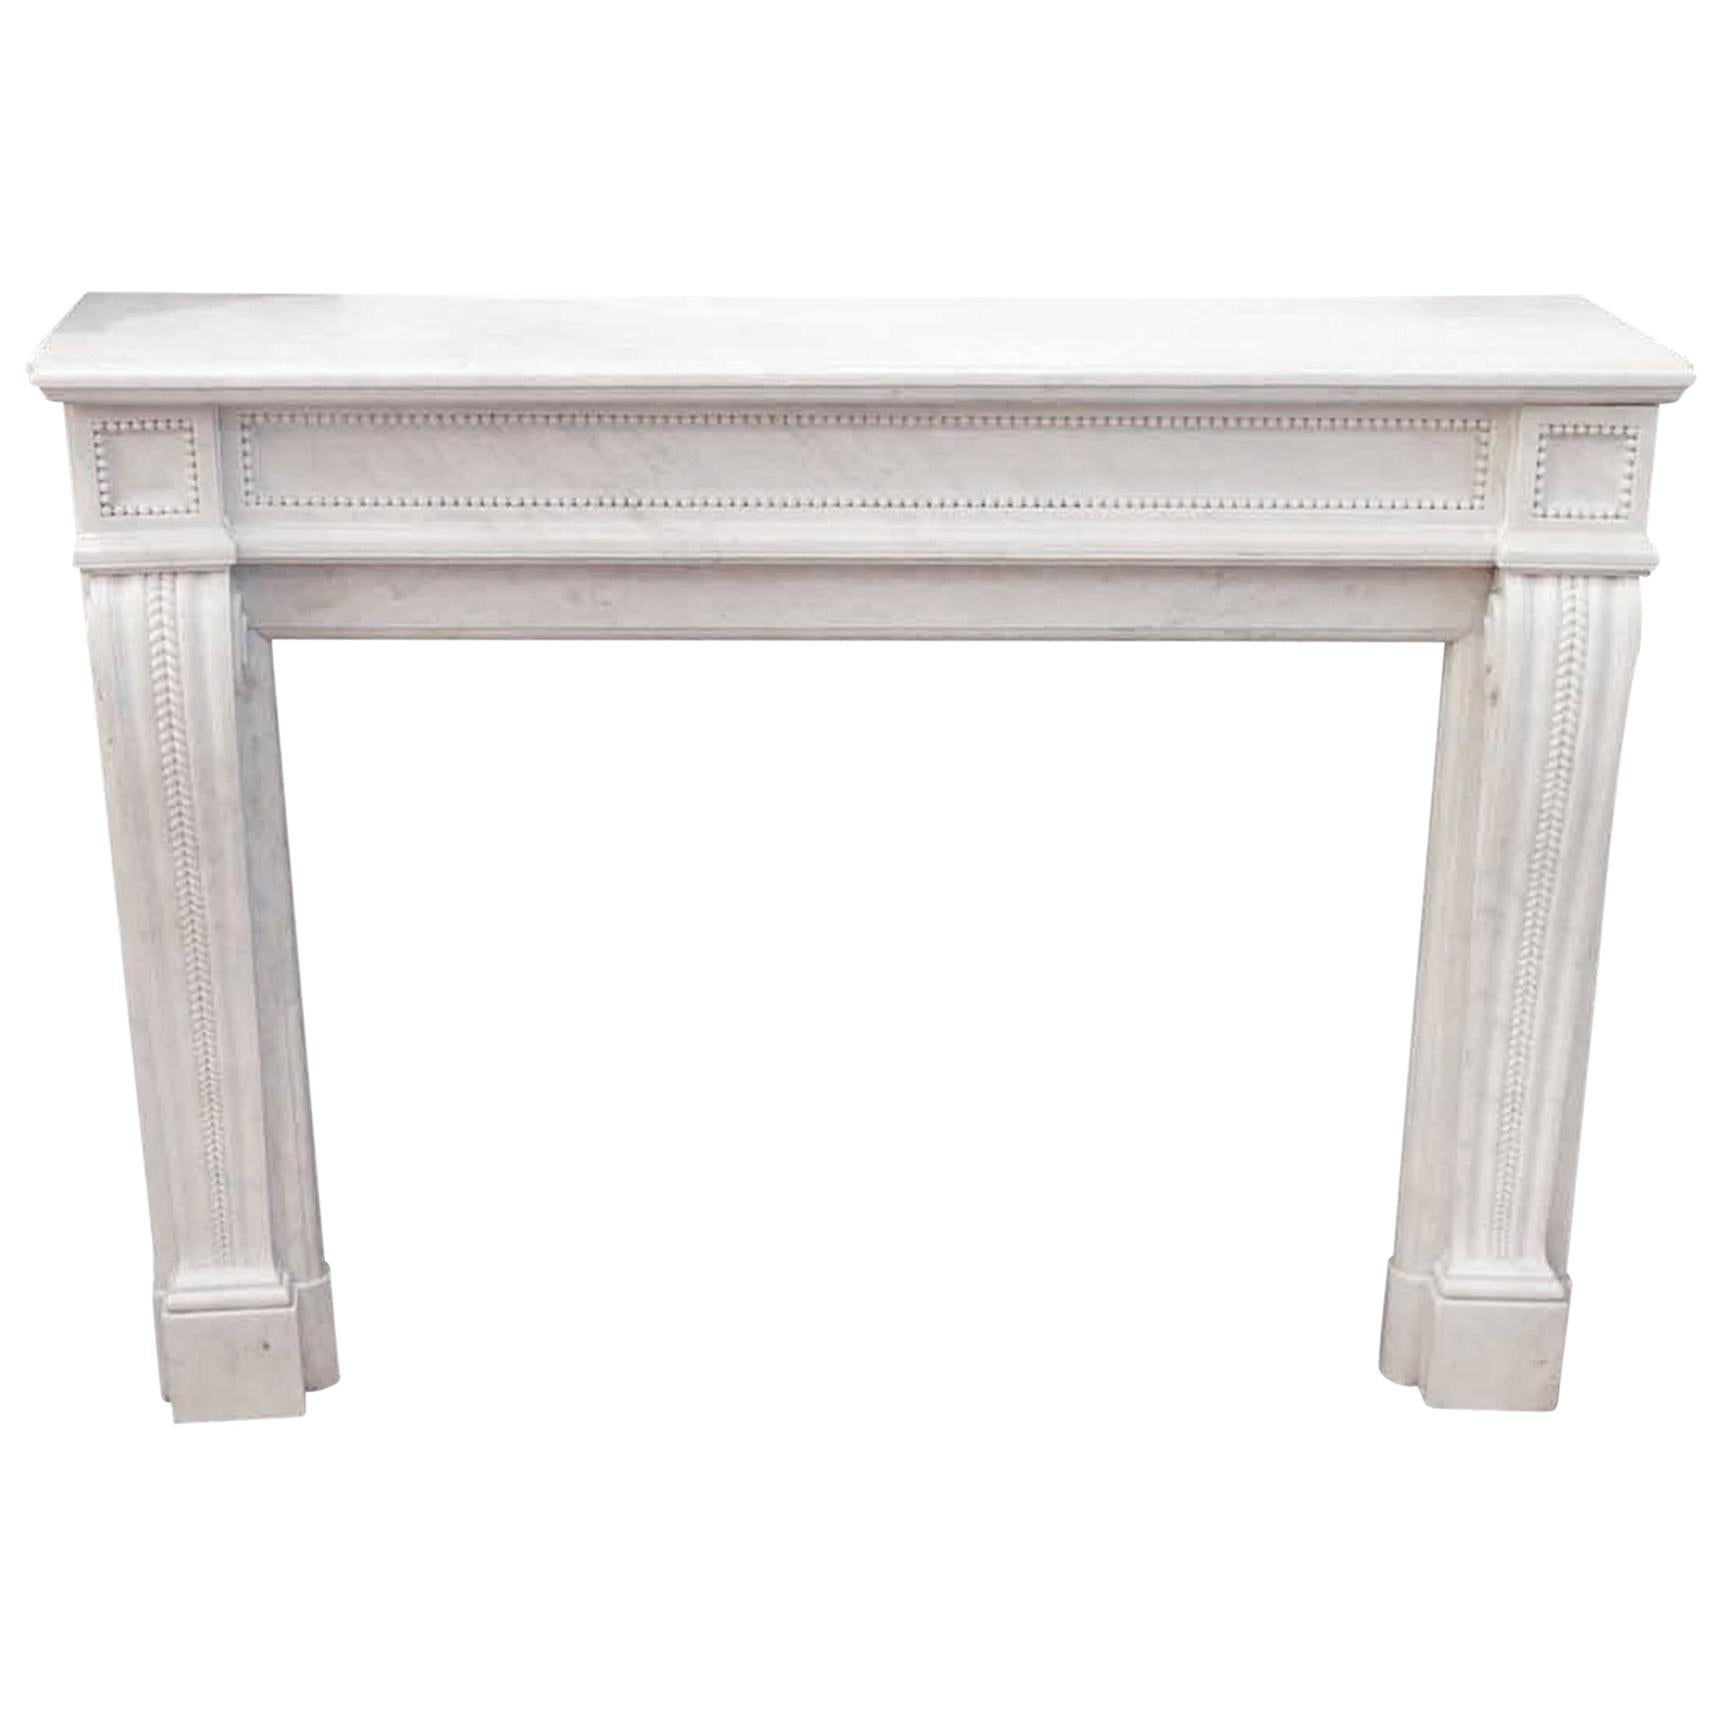 1920s White Beaded Marble Mantel with Finely Carved Details